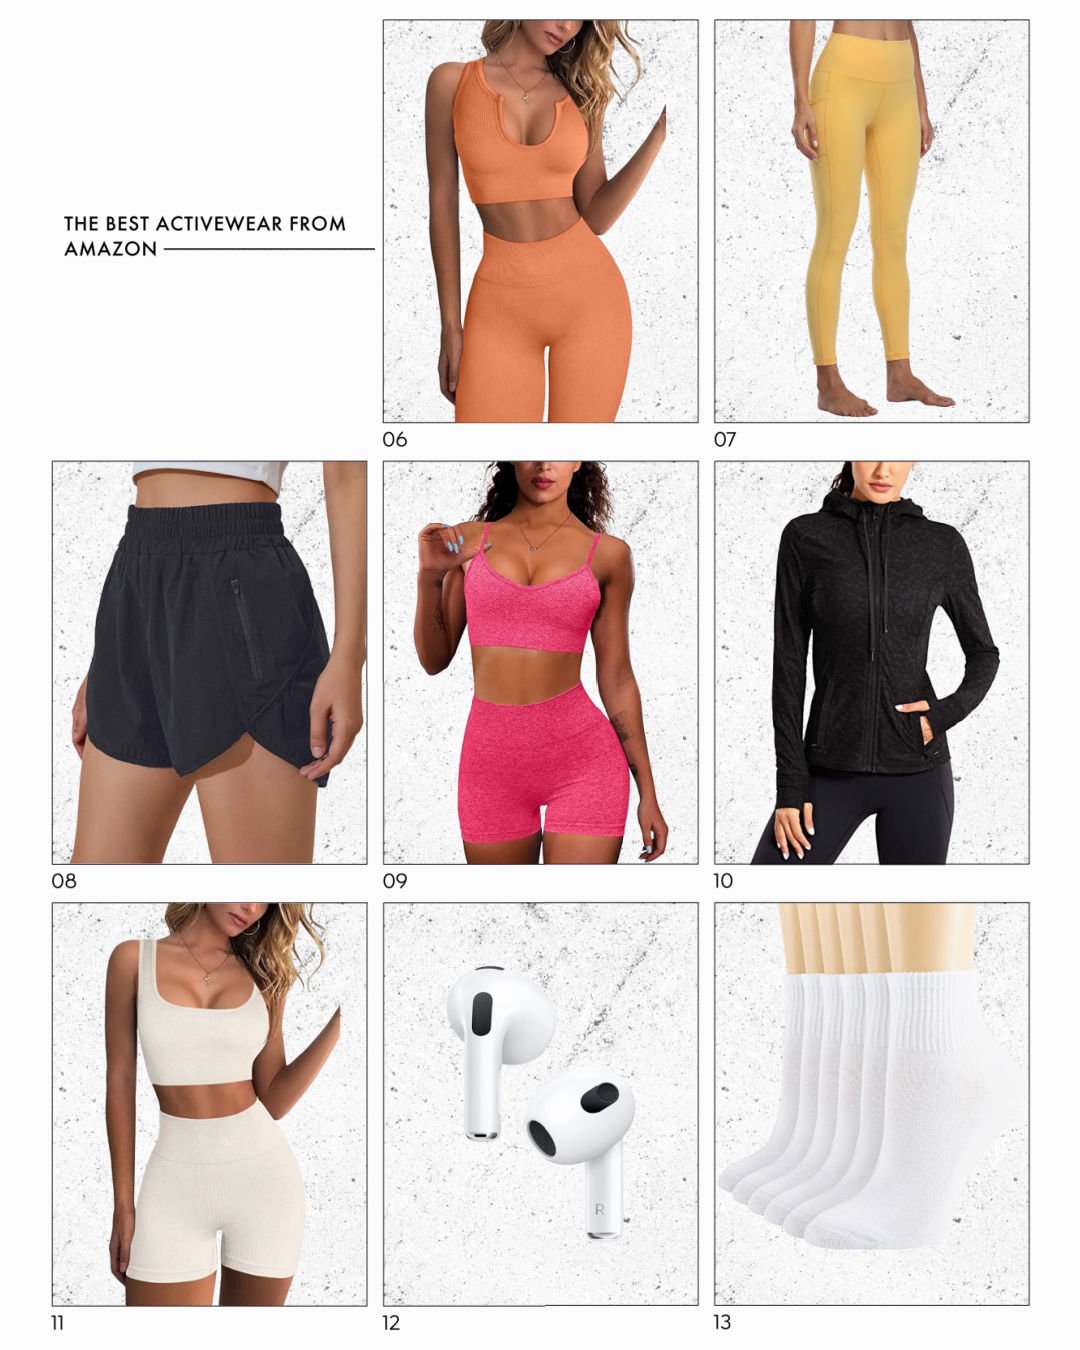 The best Amazon activewear. Activewear leggings, workout clothes, workout shorts, workout aesthetic, workout tops, workout outfits, Amazon leggings, Amazon must haves, Amazon clothing